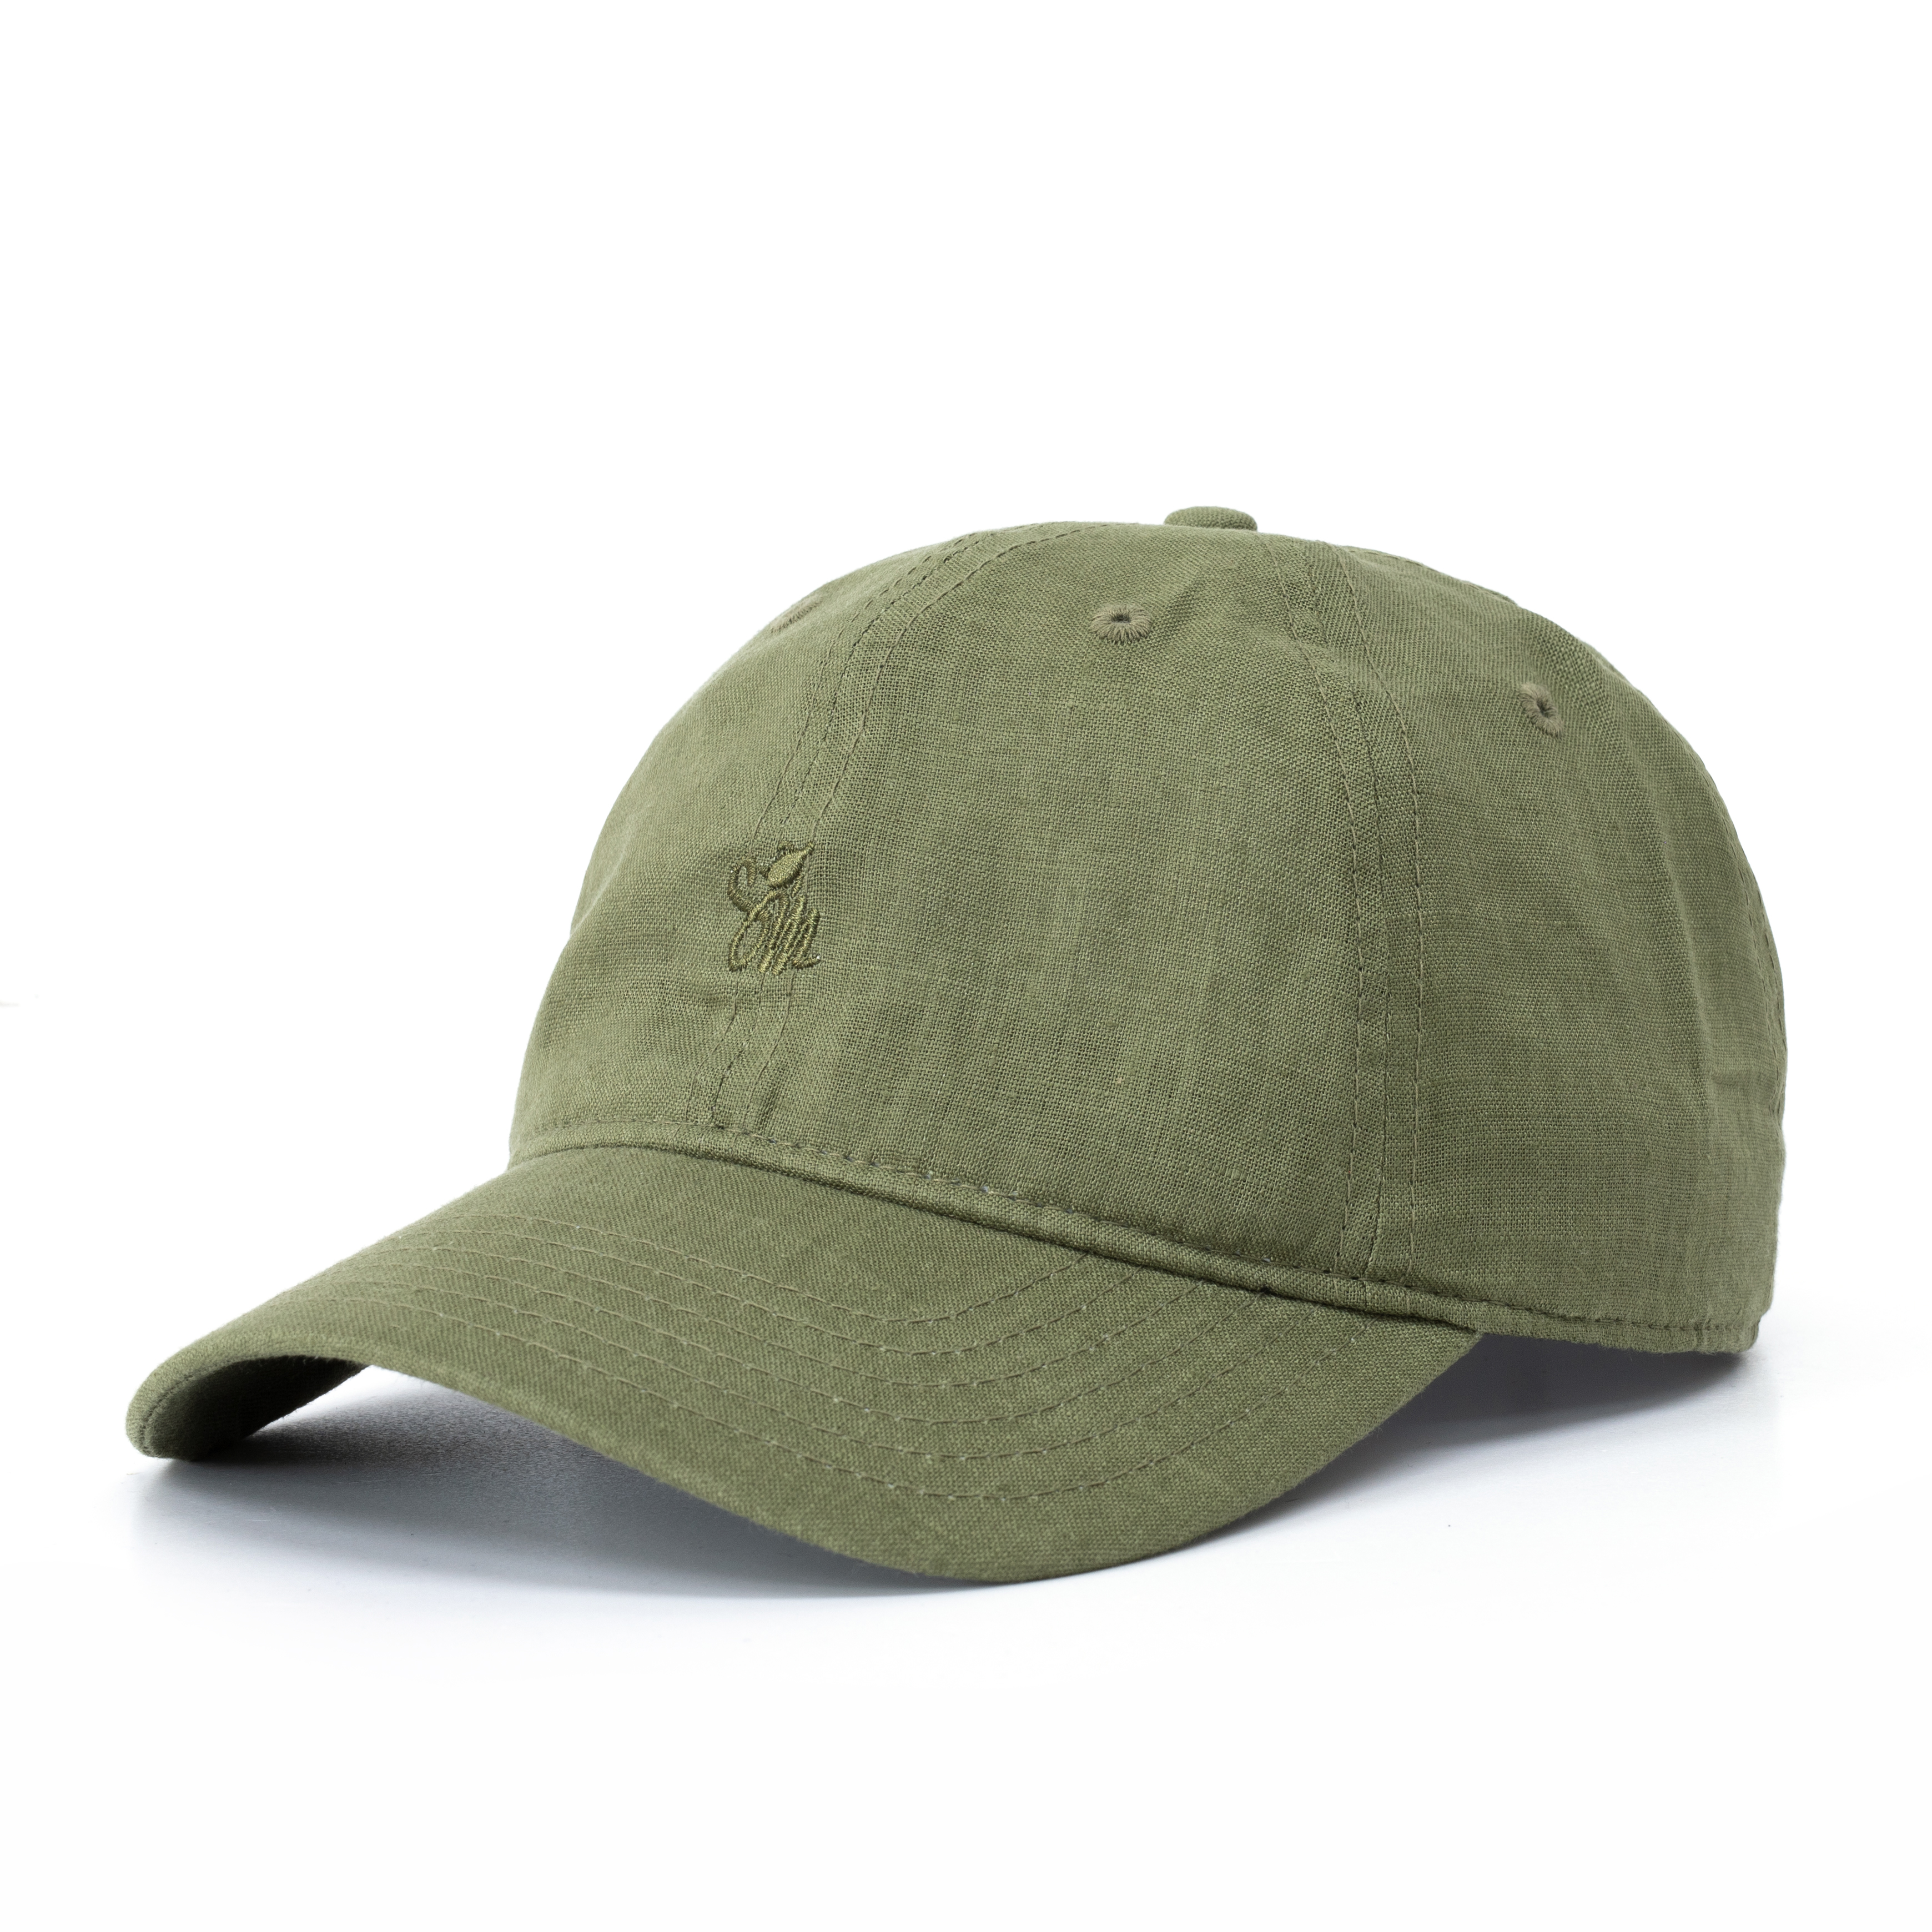 Smith & Miller Clemente Unstructured Cap, olive